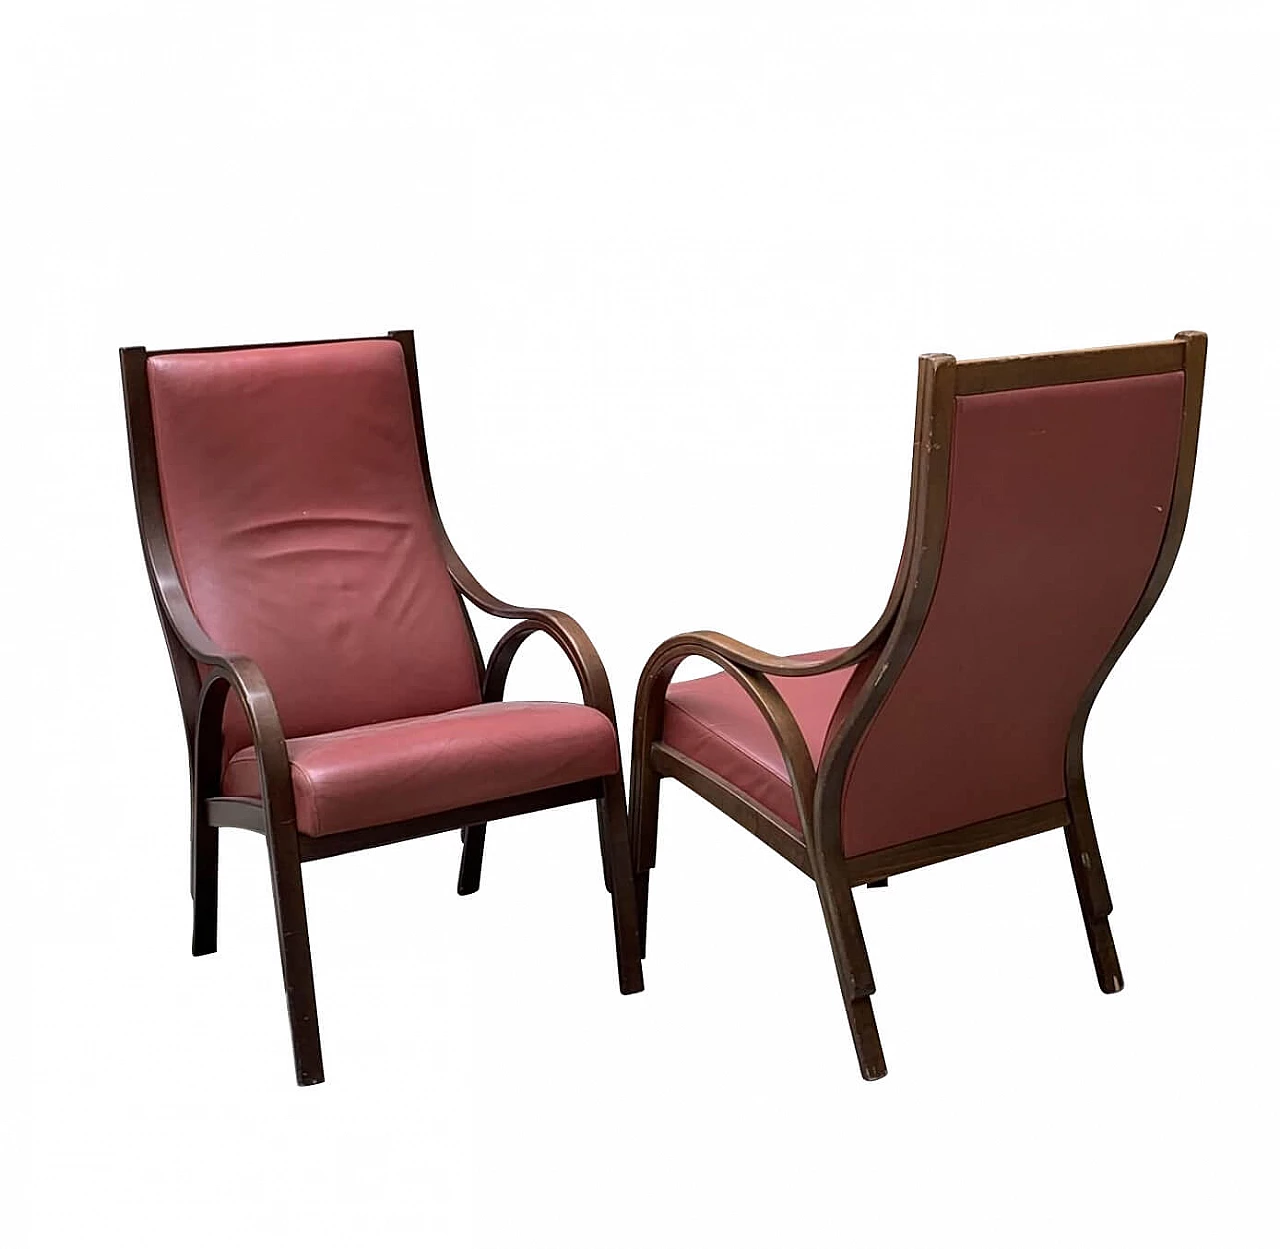 4 Armchairs in leather Cavour by Giotto Wick for Poltrona Frau 1144416